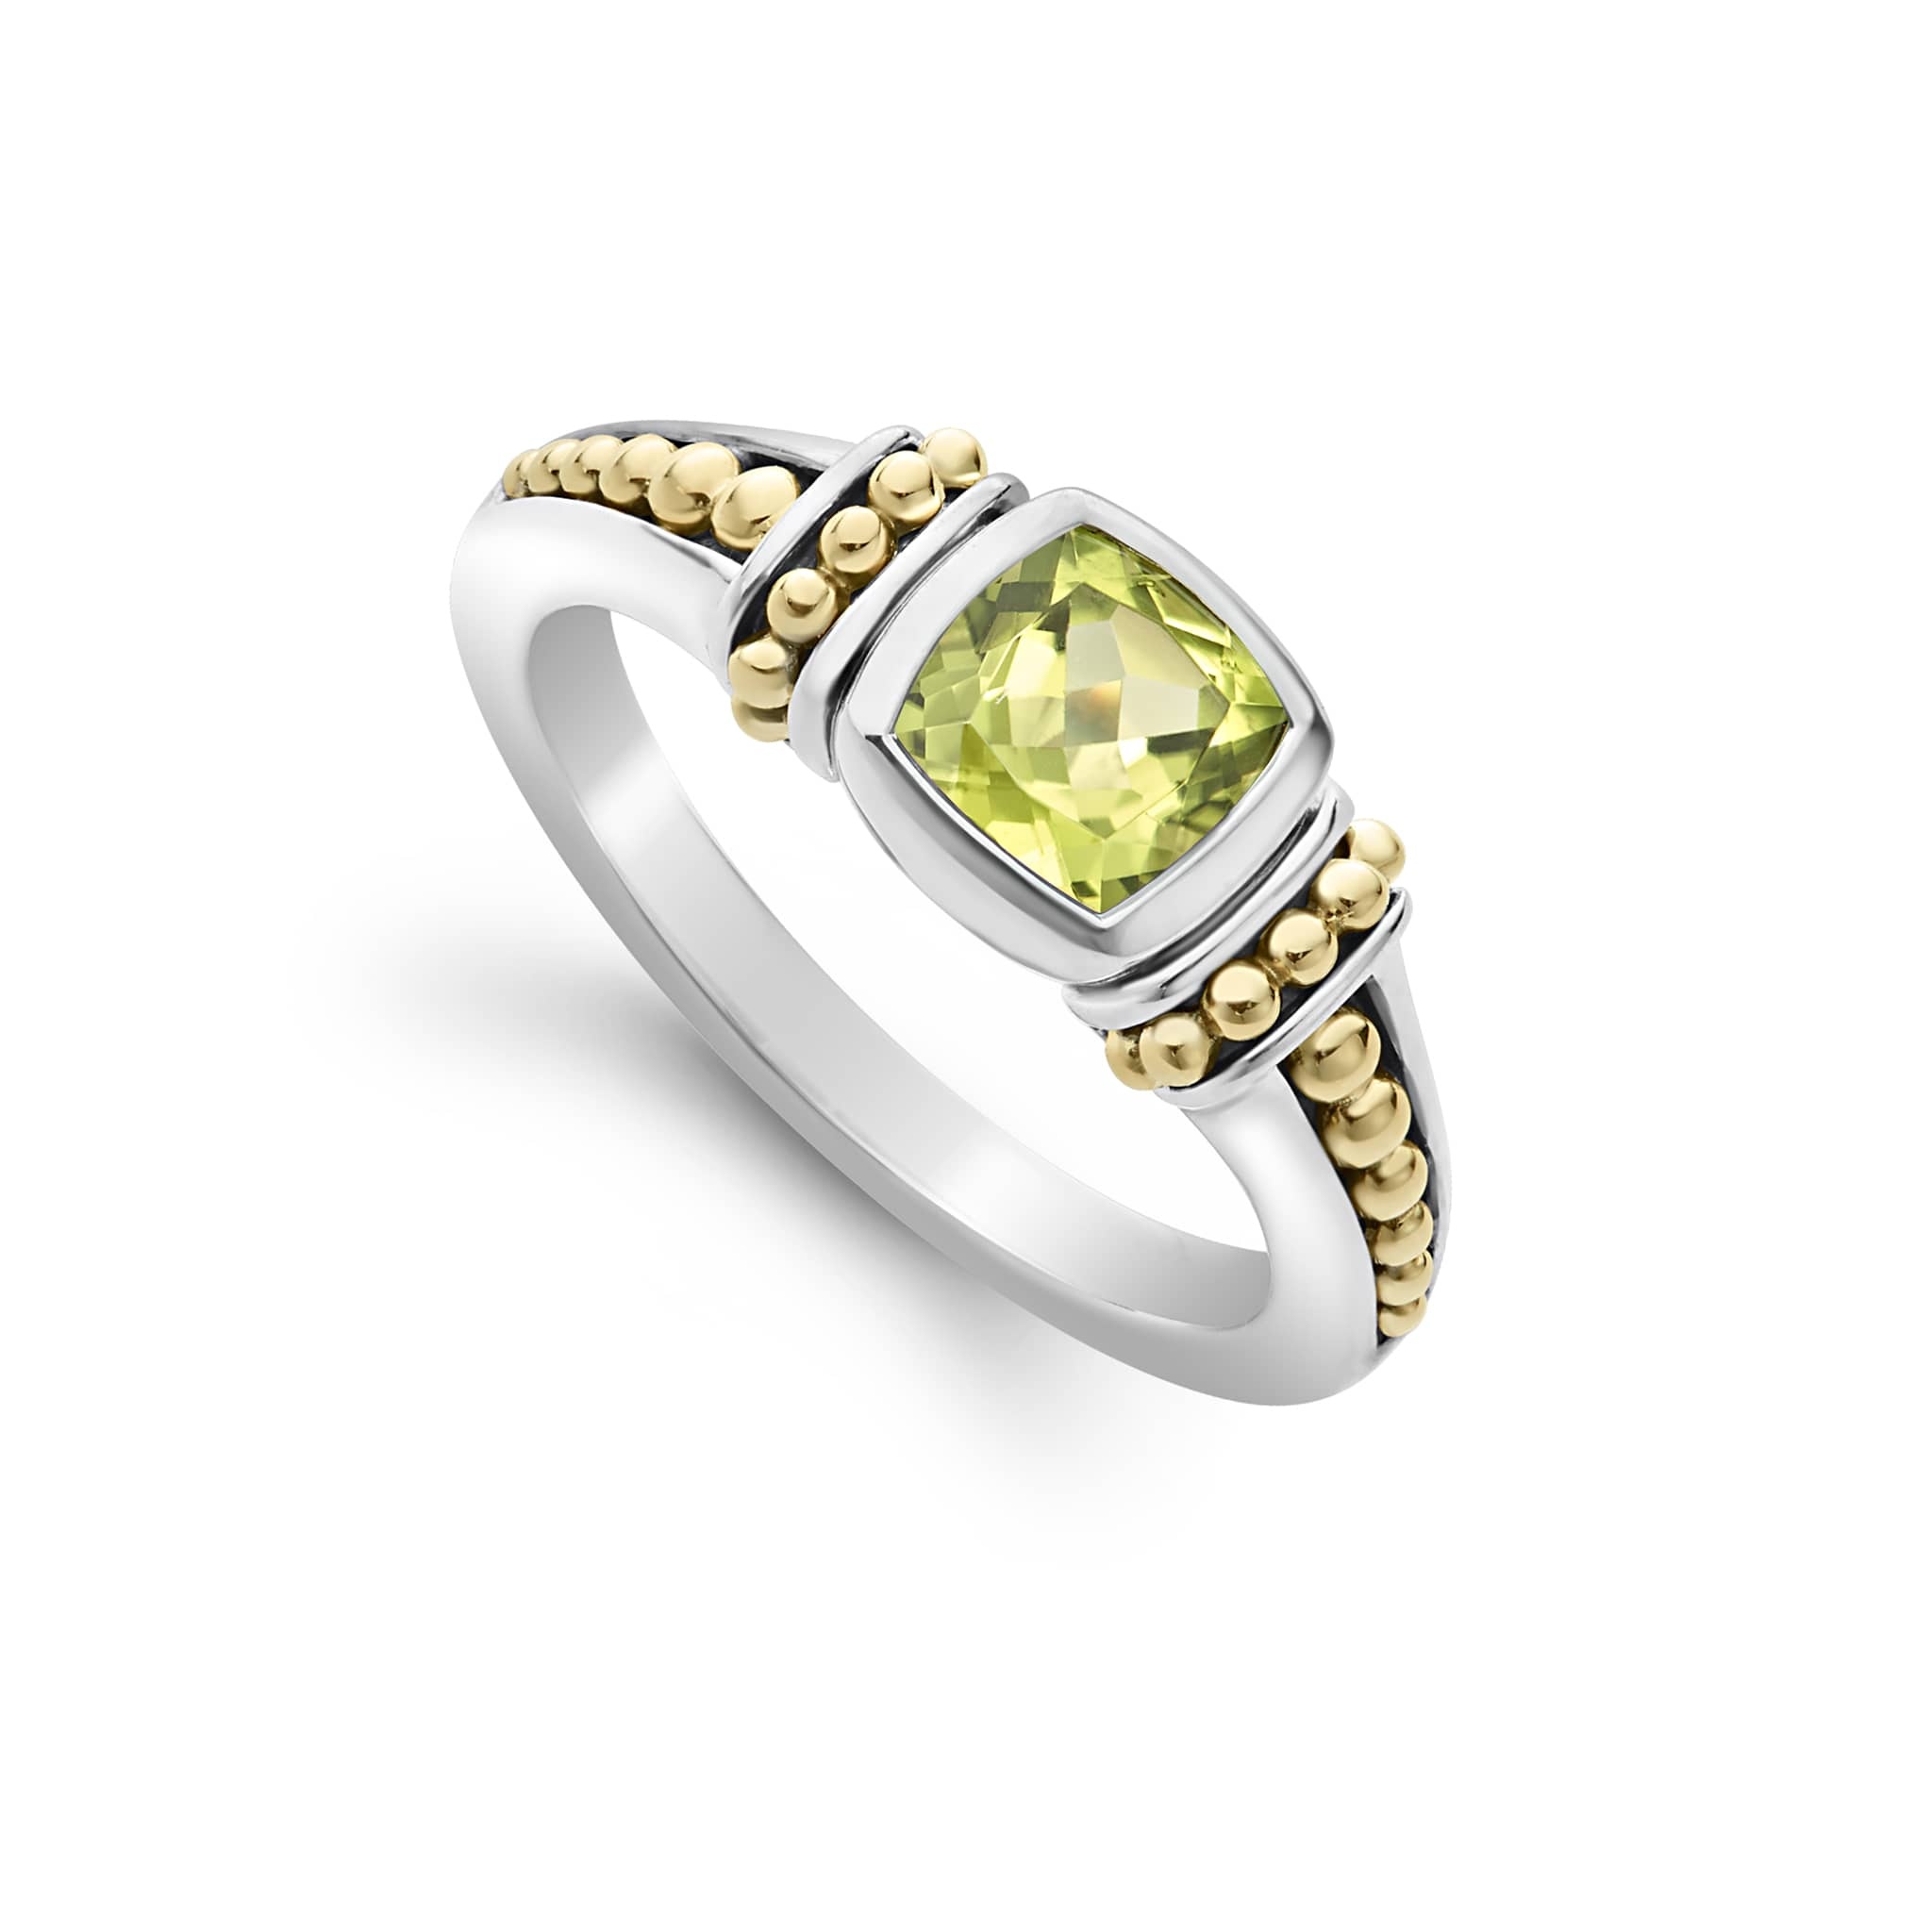 Peridot, Caviar color ring, Exquisite craftsmanship, Stunning jewelry, 2050x2050 HD Phone